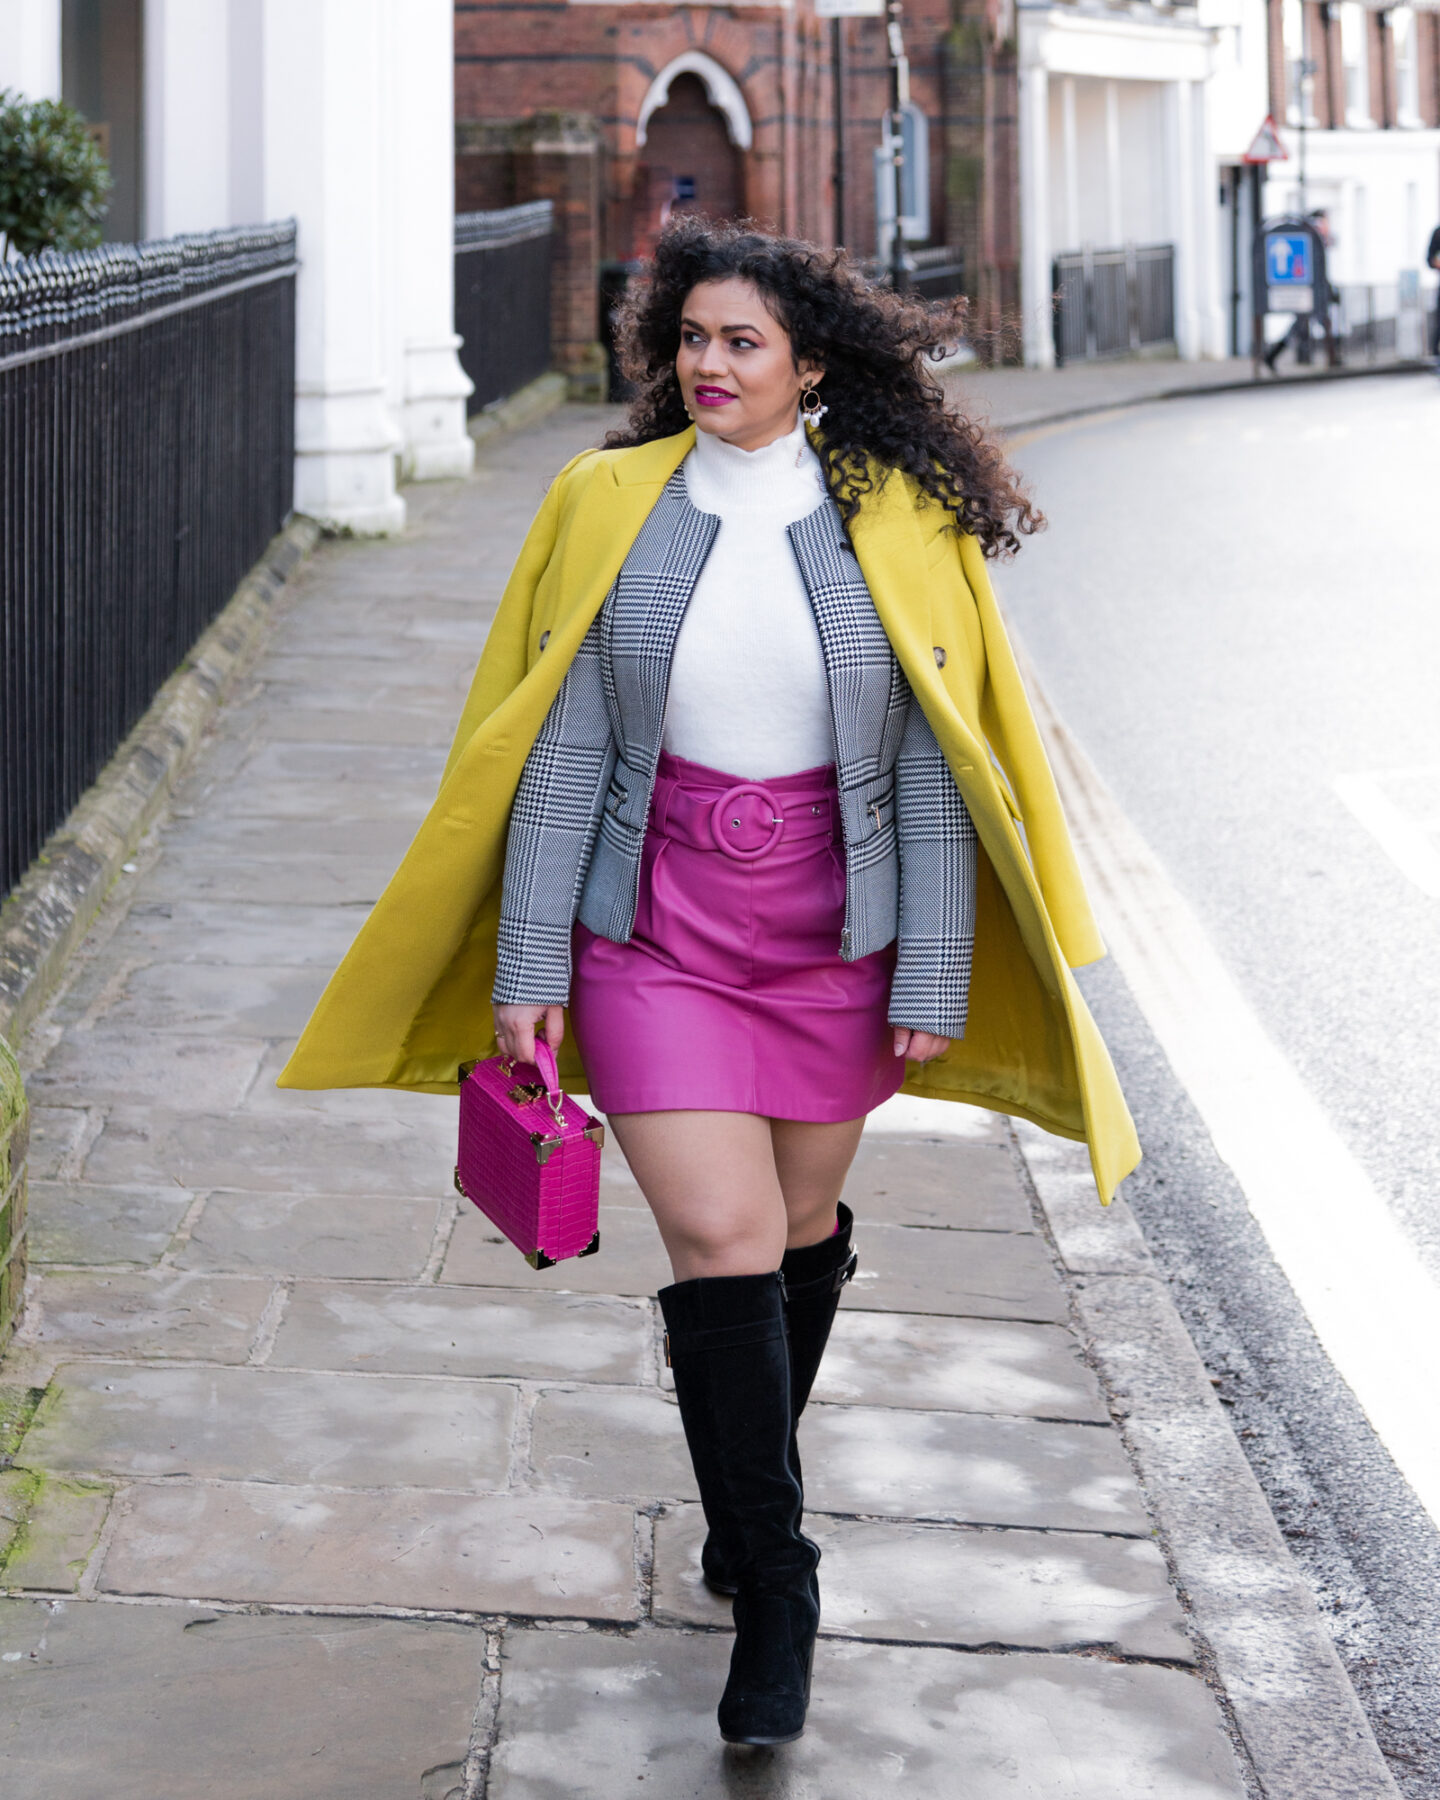 The Best Brands and Styles for Curvy Girls - Where to shop when